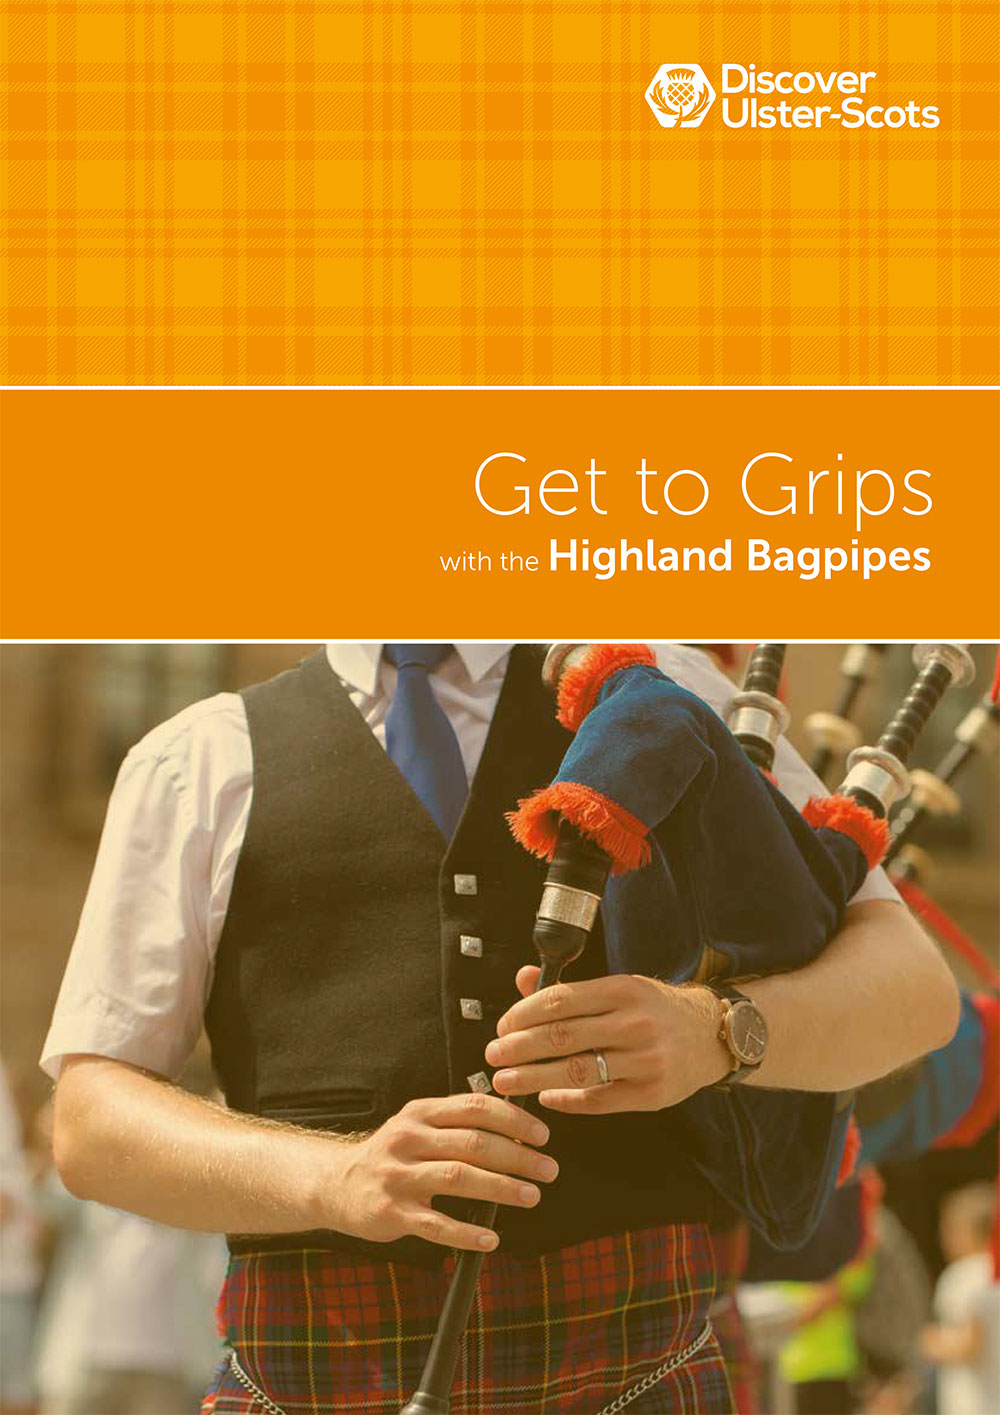 Get to Grips with the Highland Bagpipes